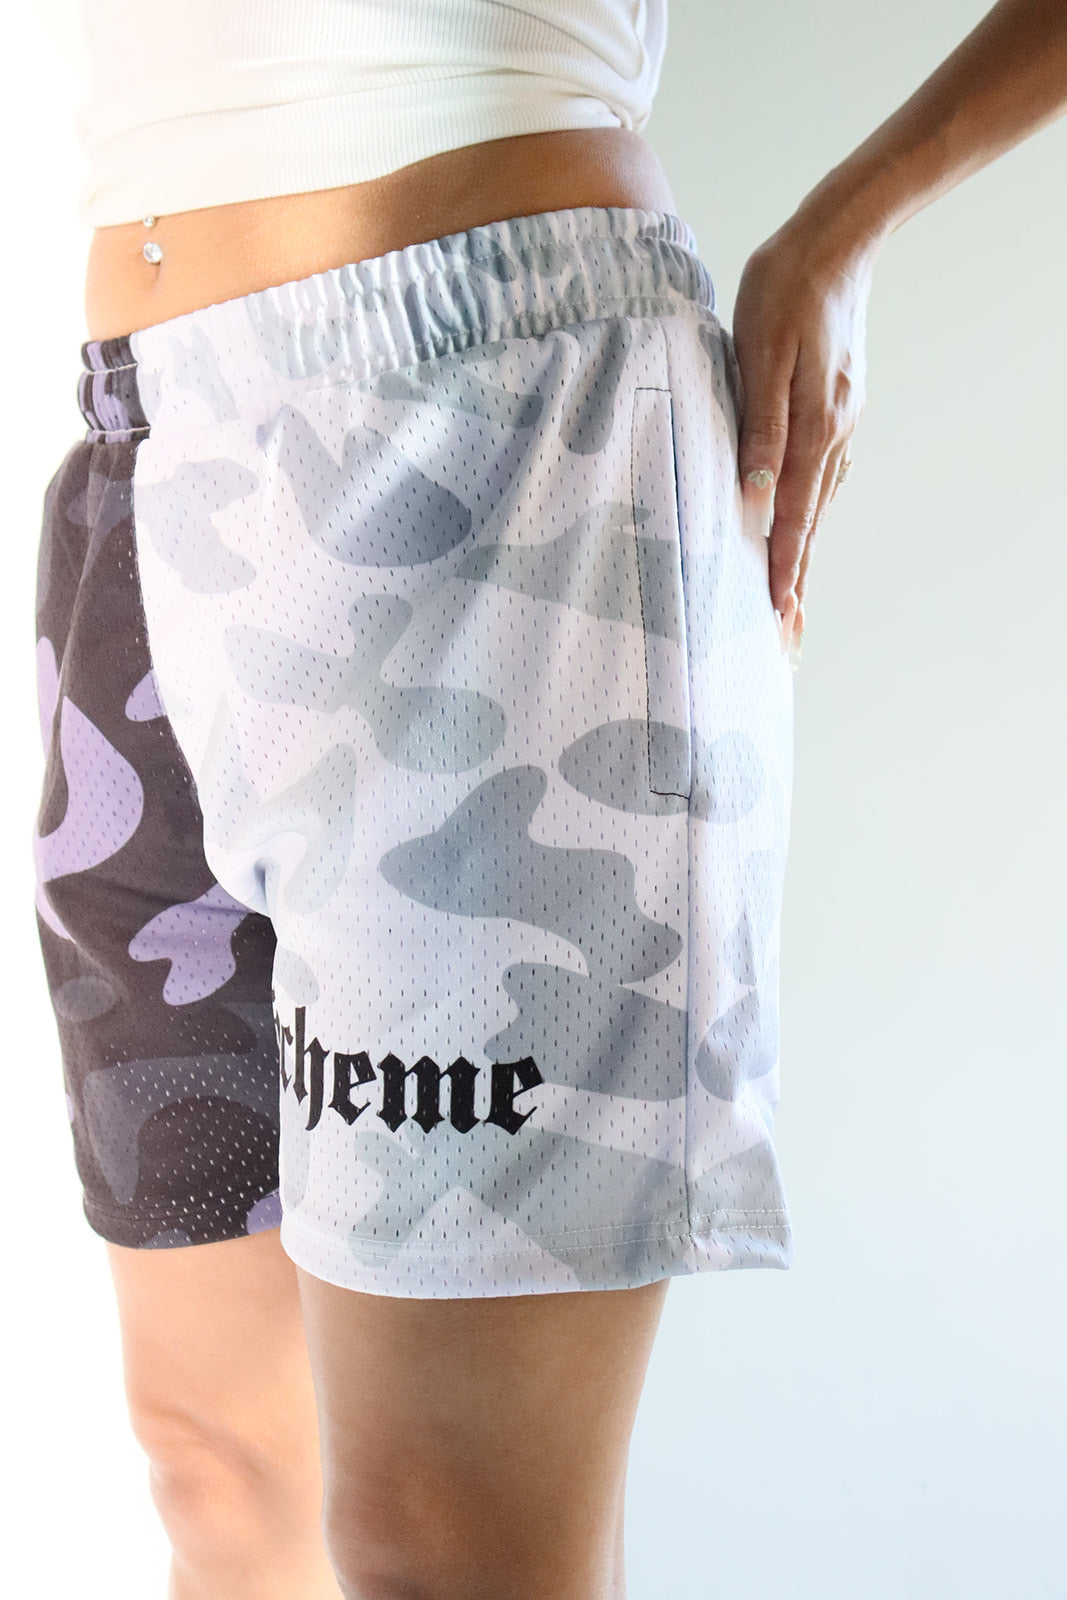 Men's graphic mesh shorts with a picture of white black gray camo